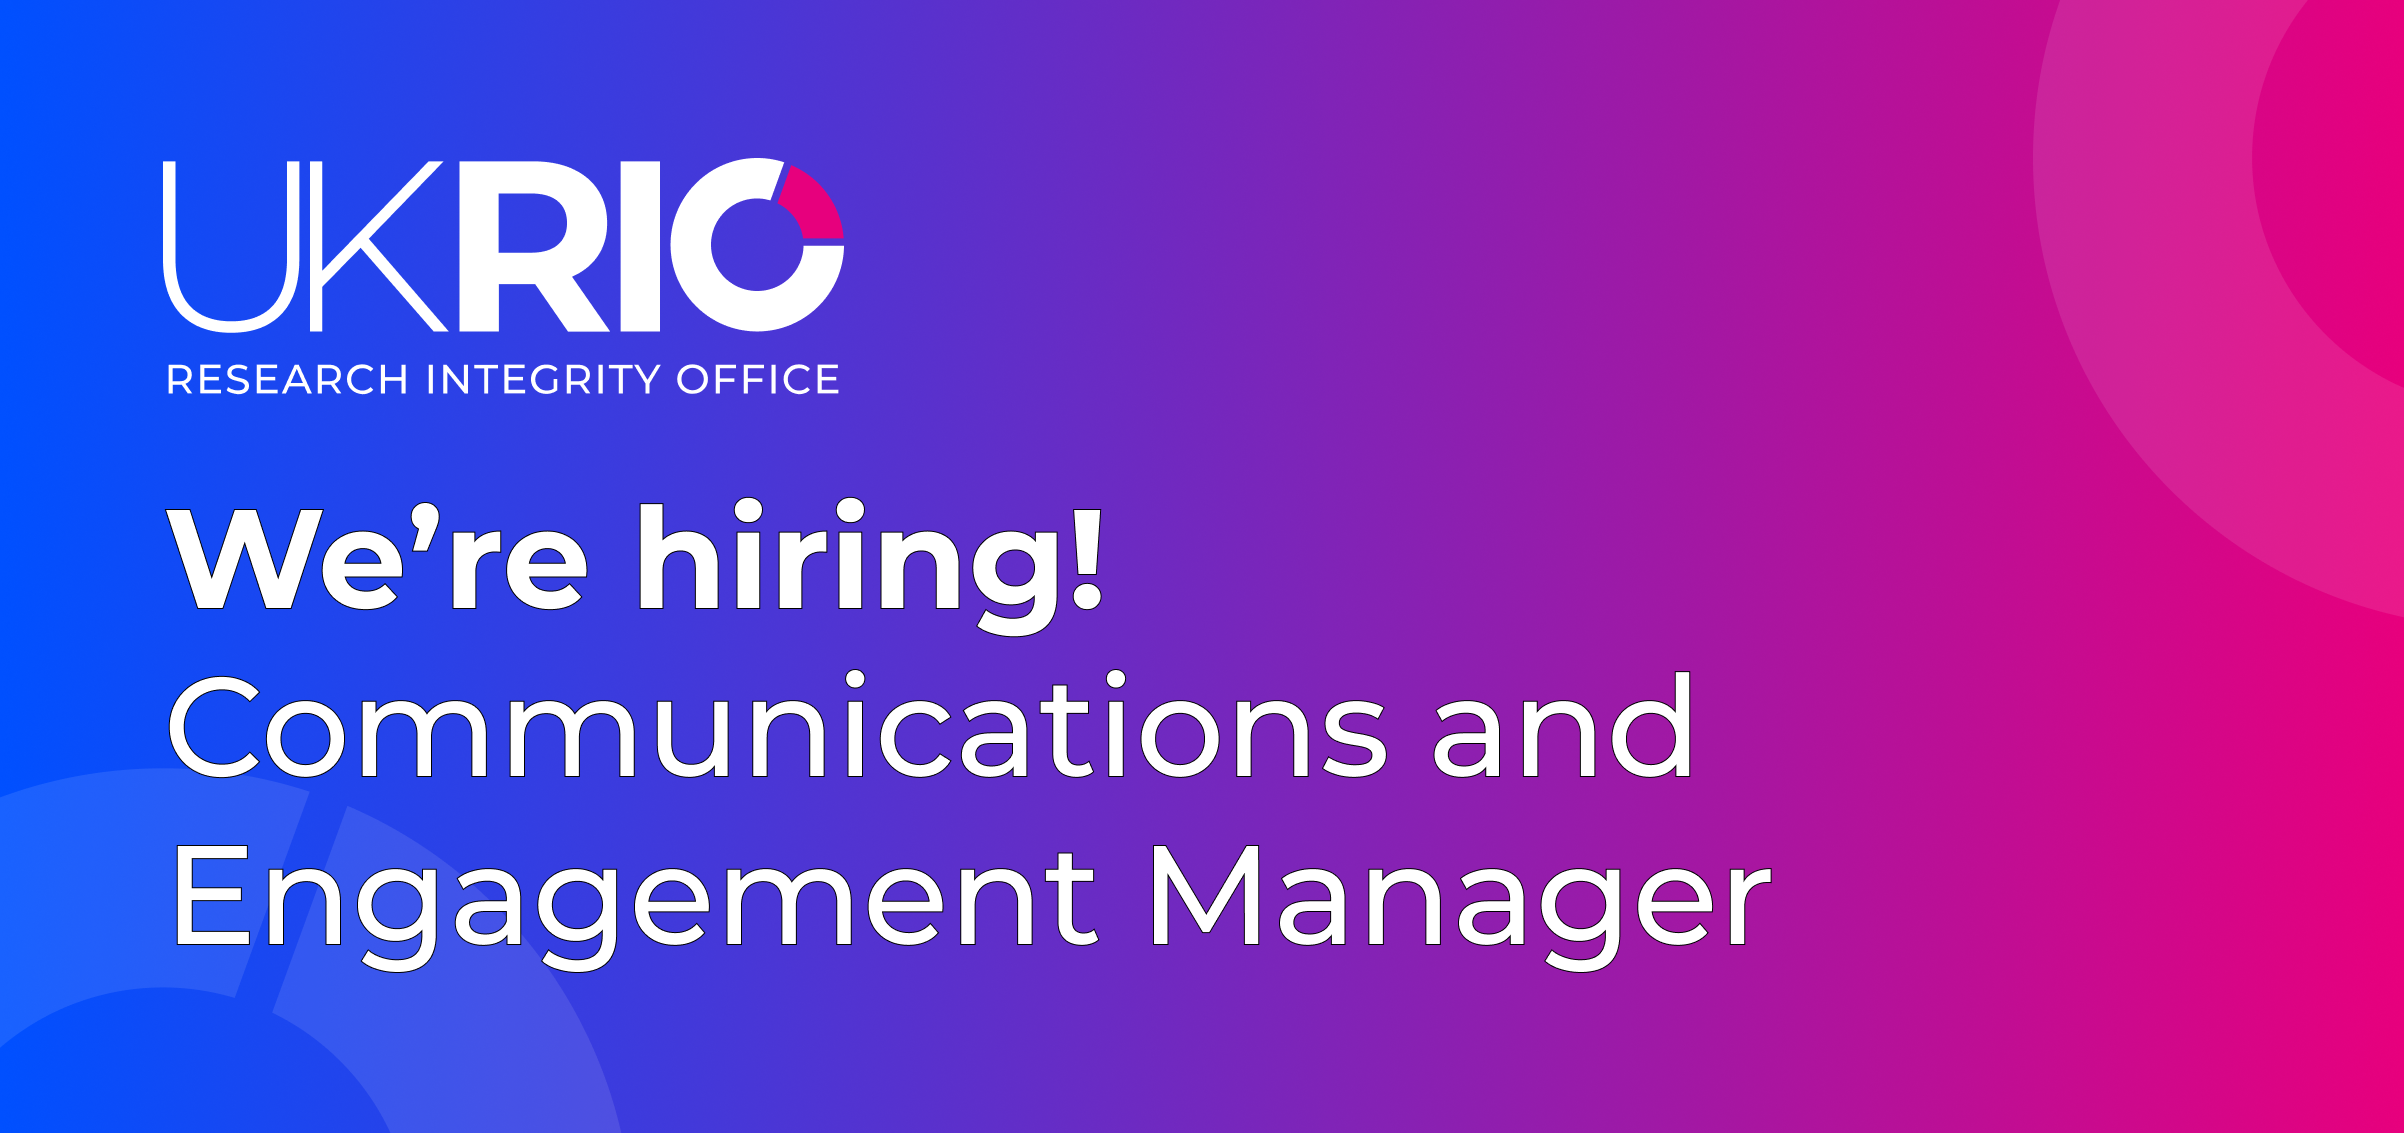 We're hiring - Communications and Engagement Manager